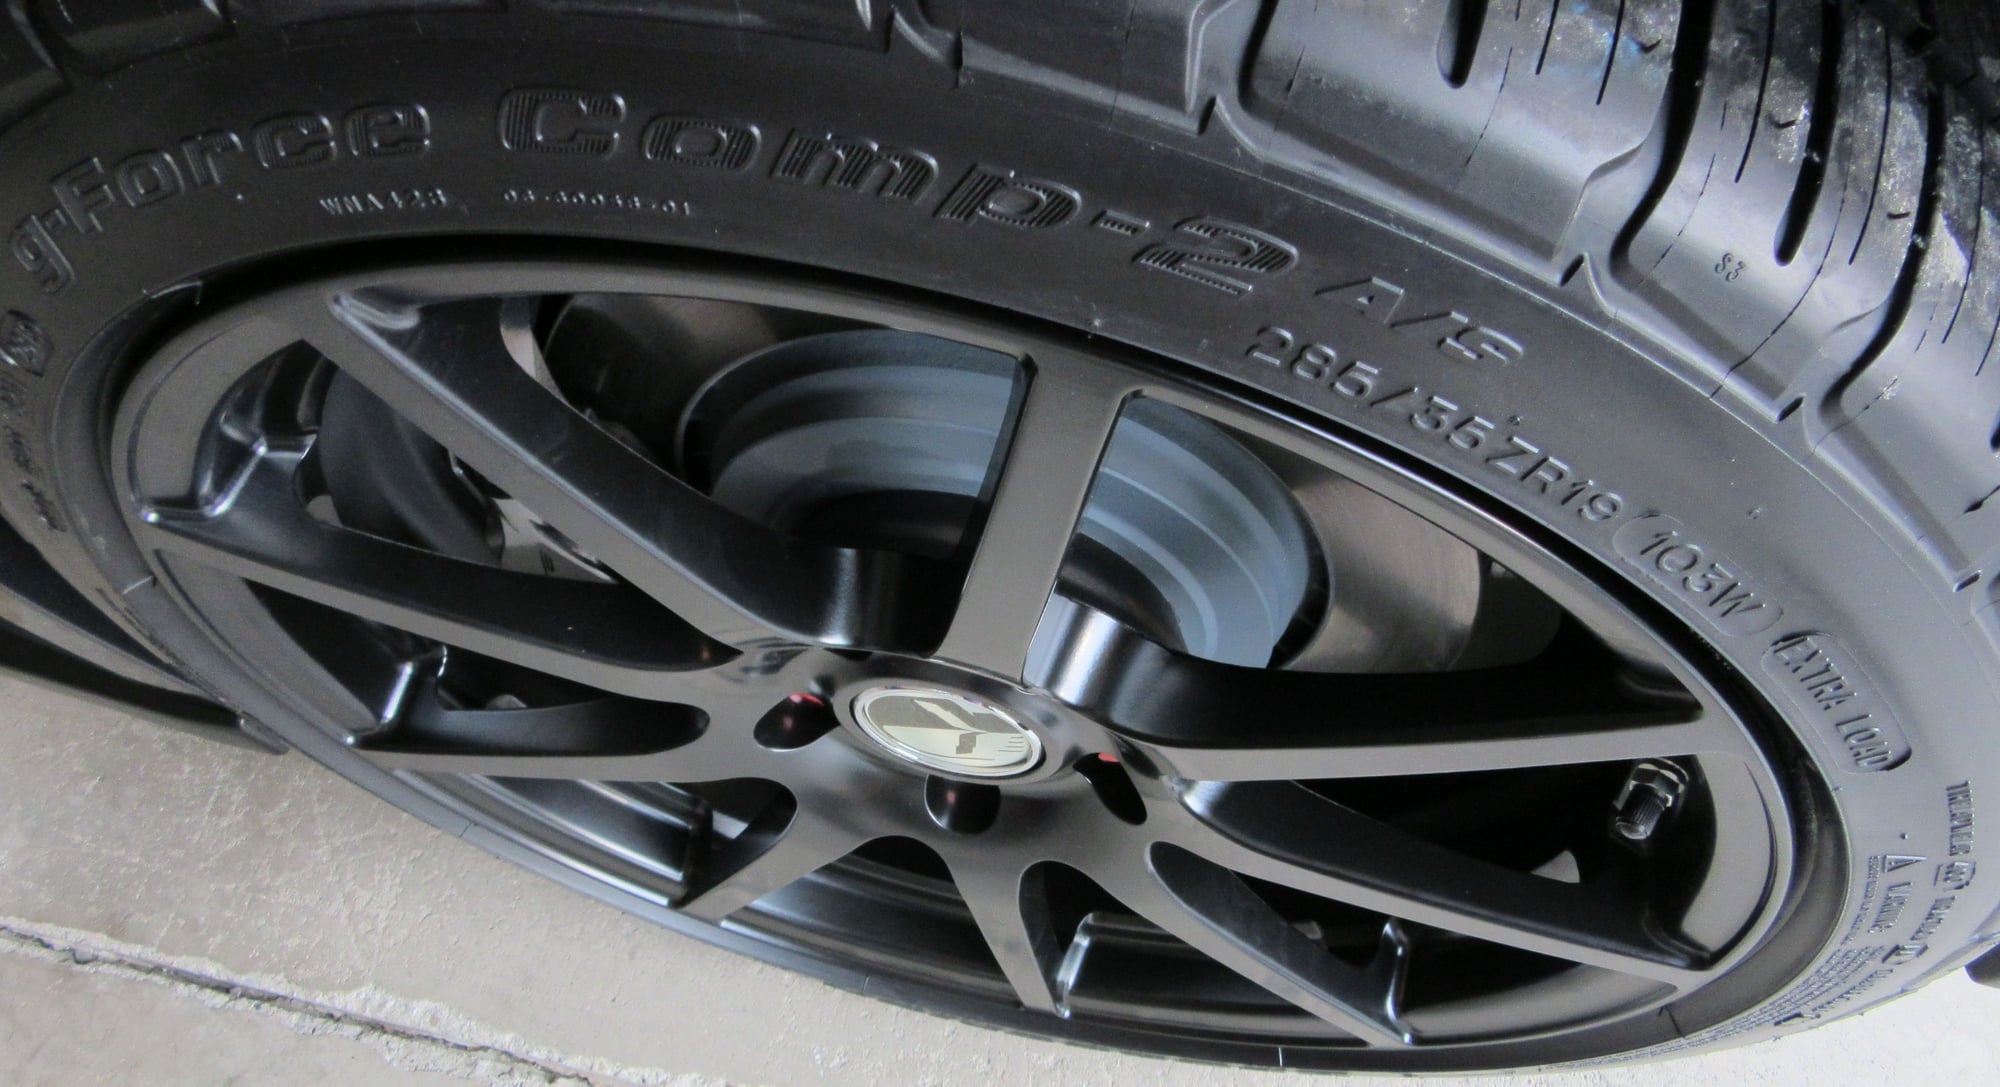 bfgoodrich g force comp 2 as plus review